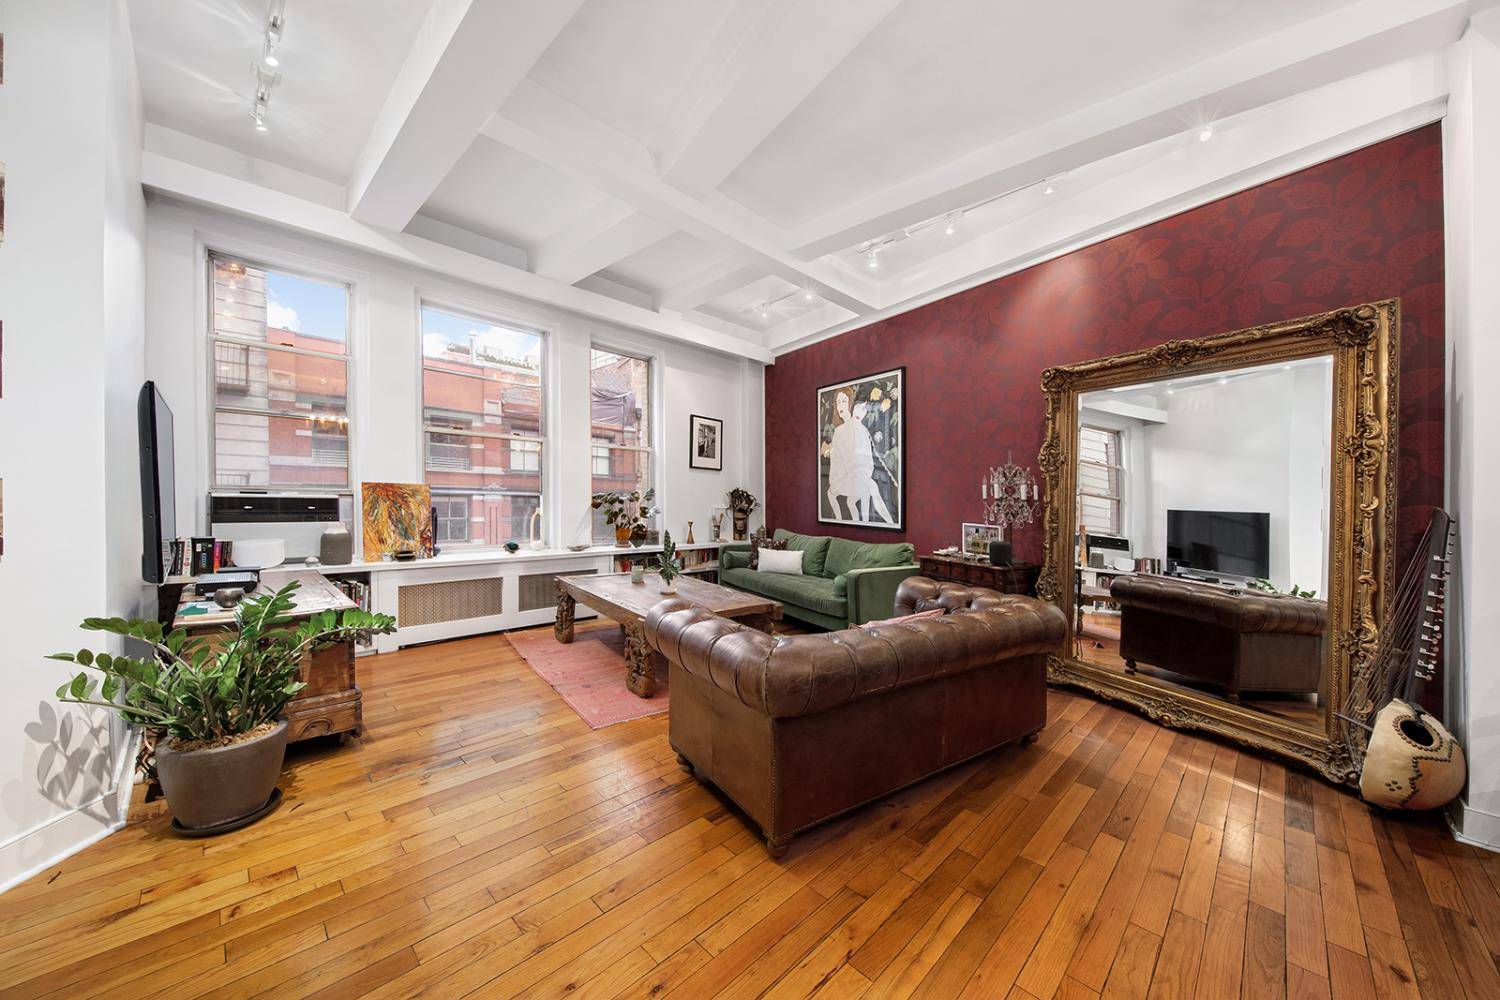 This bohemian, authentic, beautifully renovated loft in the heart of Tribeca has it all high end renovation with top of the line appliances and custom finishes ; high ceilings ; ...